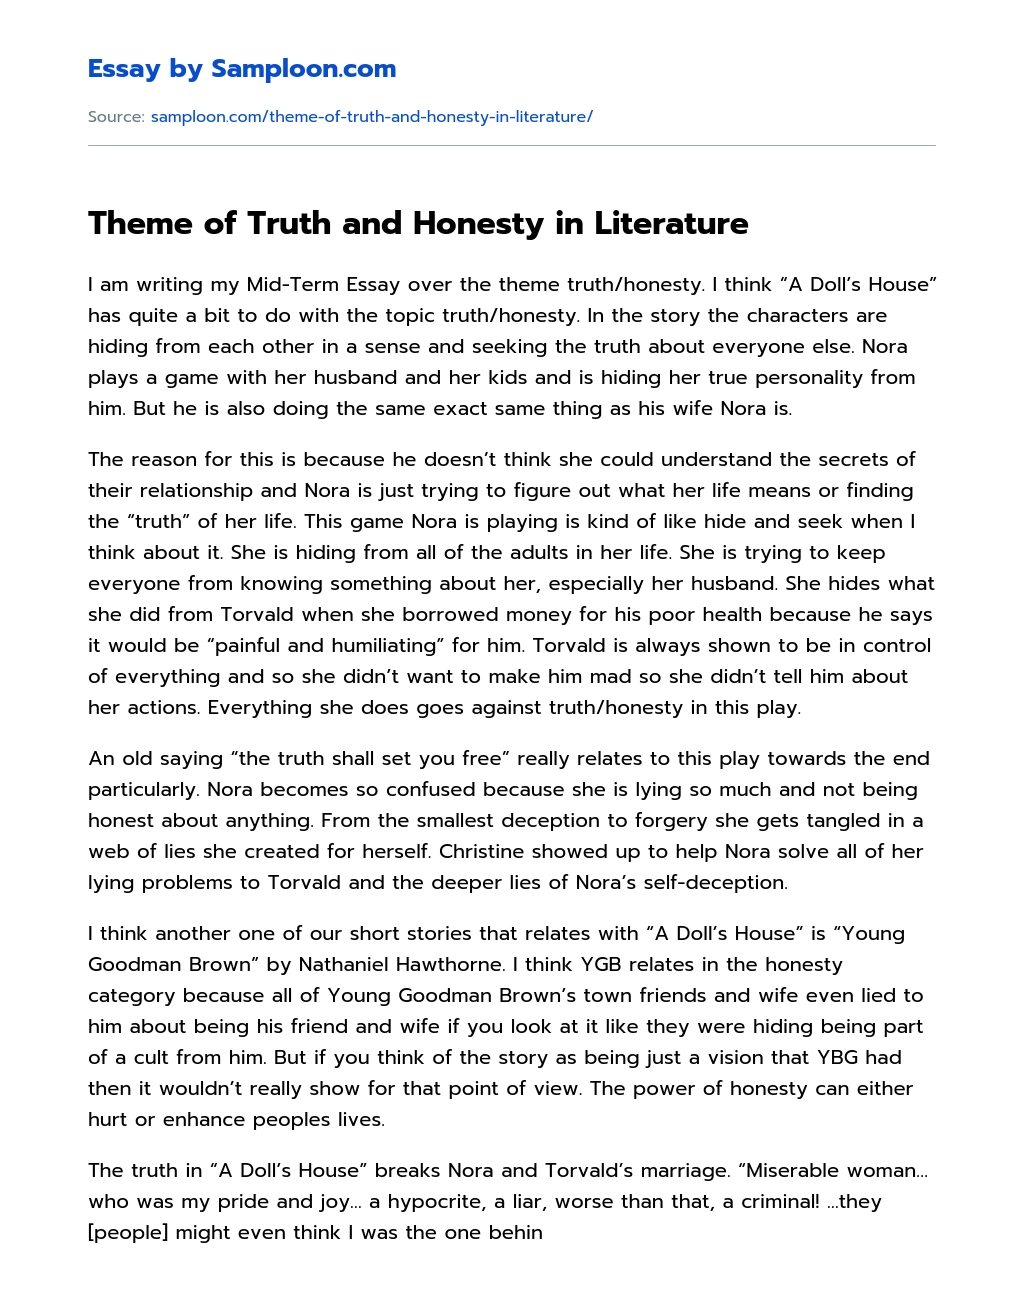 Theme of Truth and Honesty in Literature essay